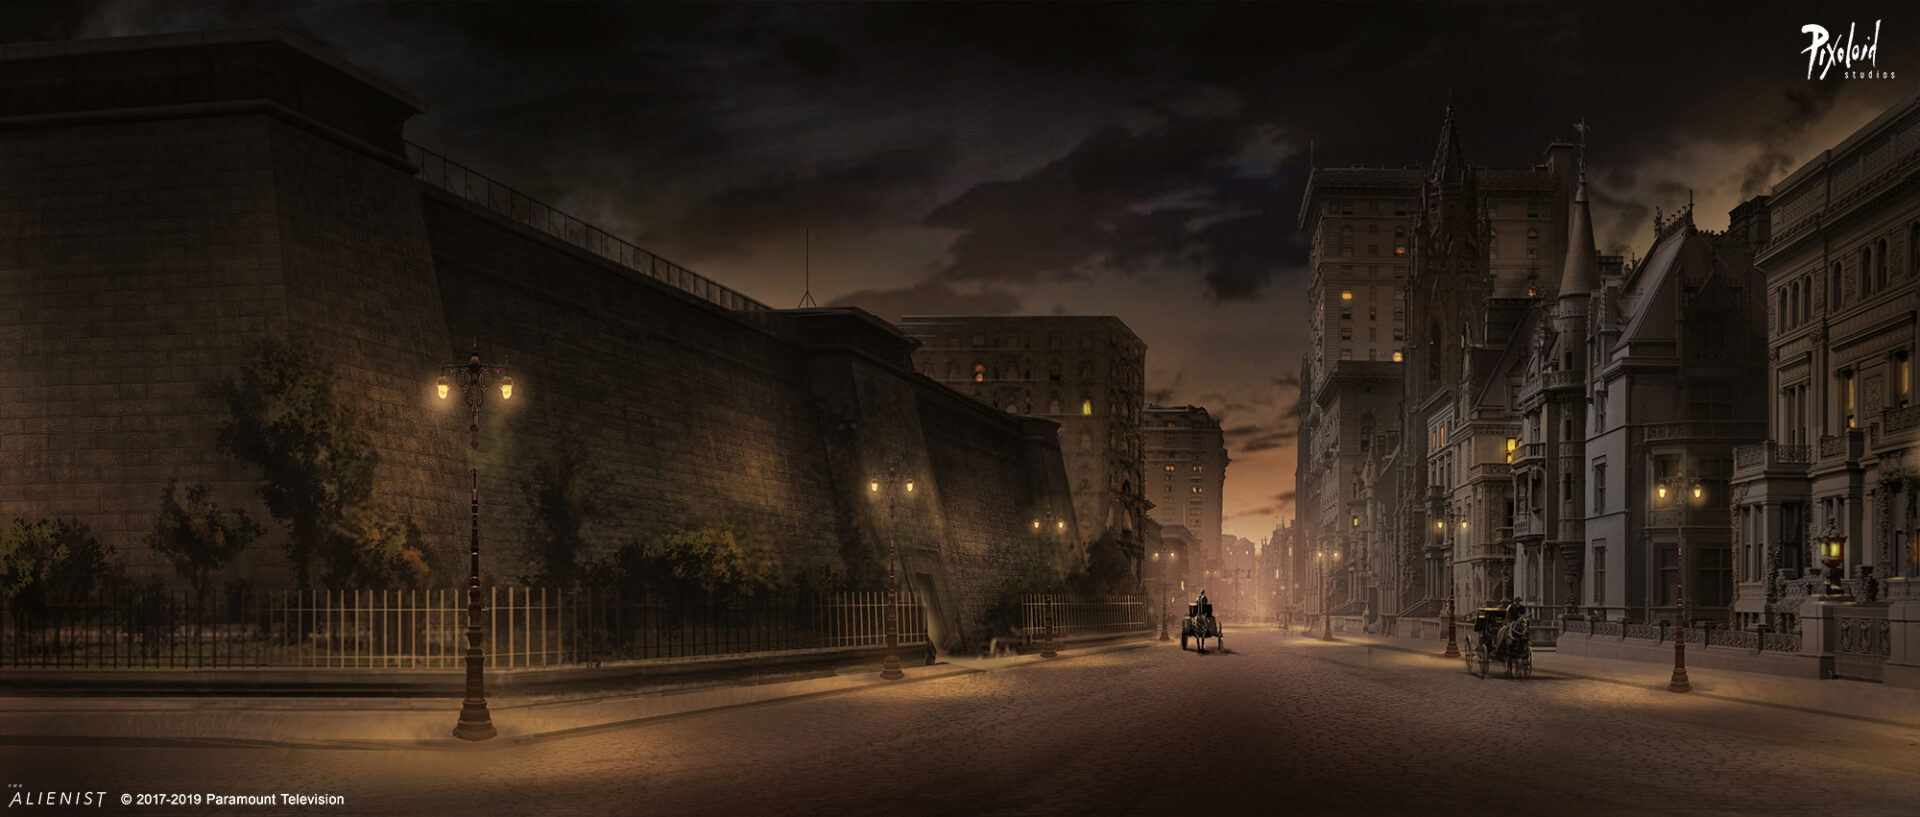 Corton reservoir - Streets at night - Set dressing, Location concept design for The Alienist